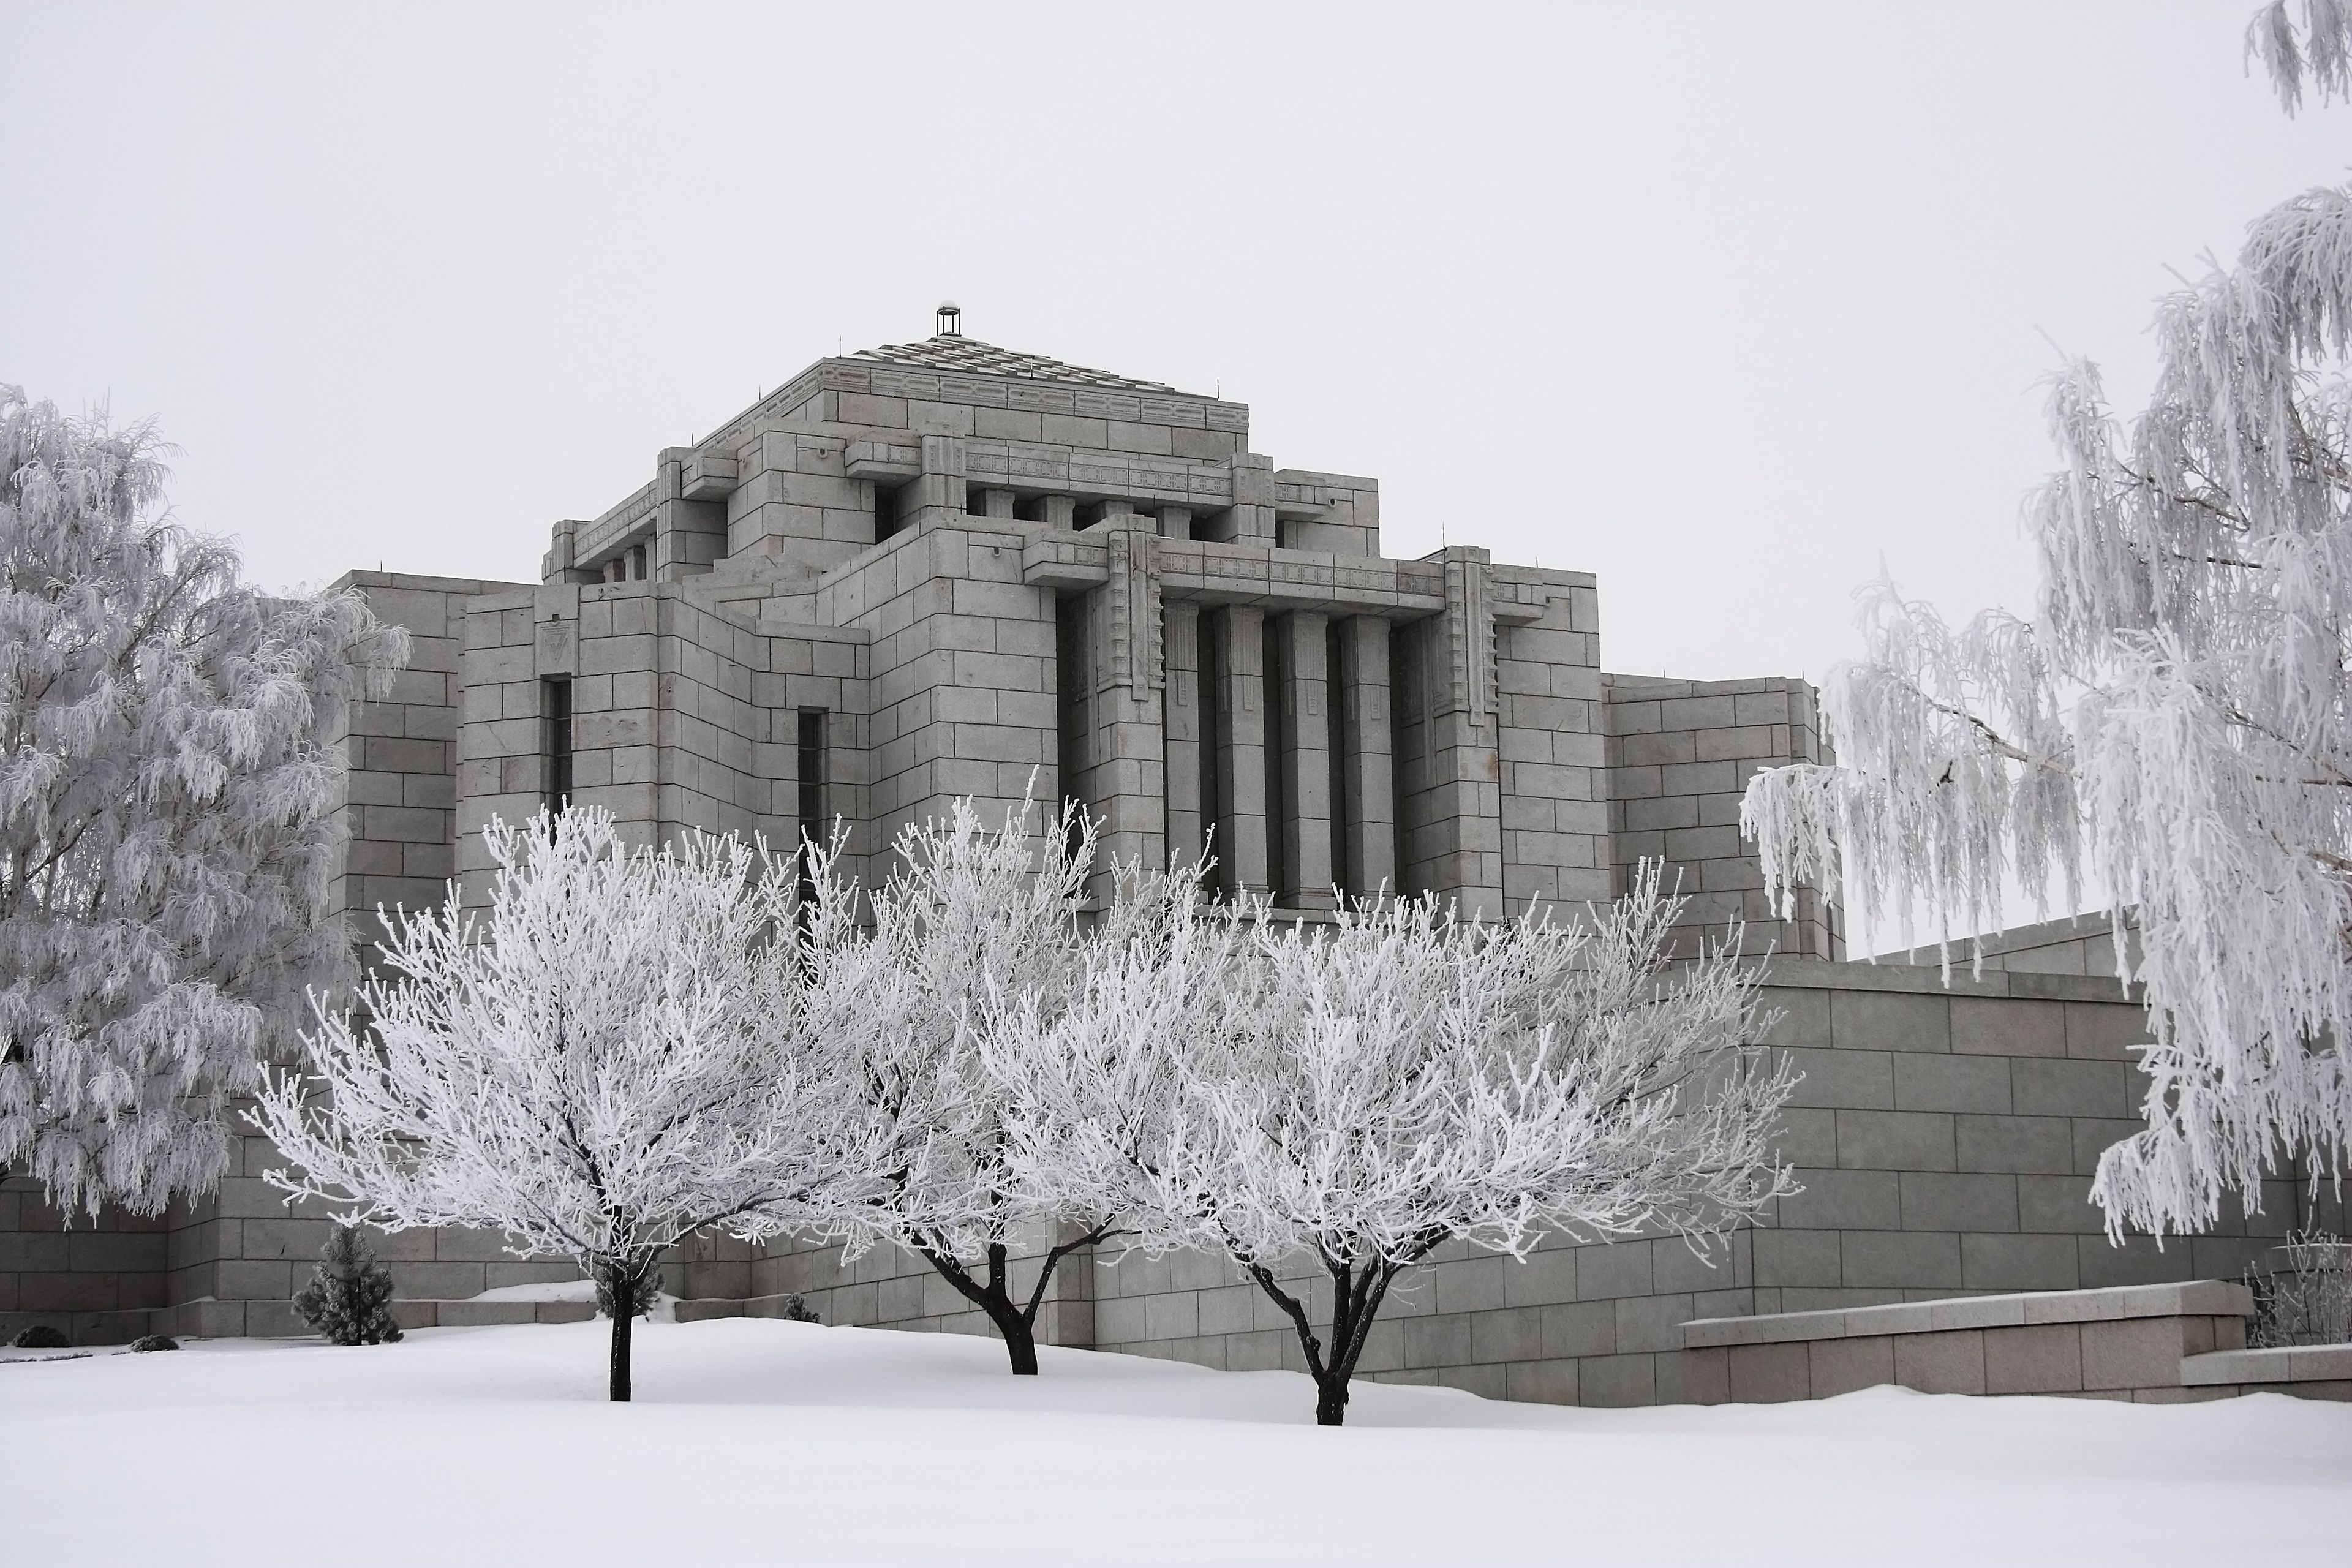 The Cardston Alberta Temple during winter, including the entrance and exterior of the temple.